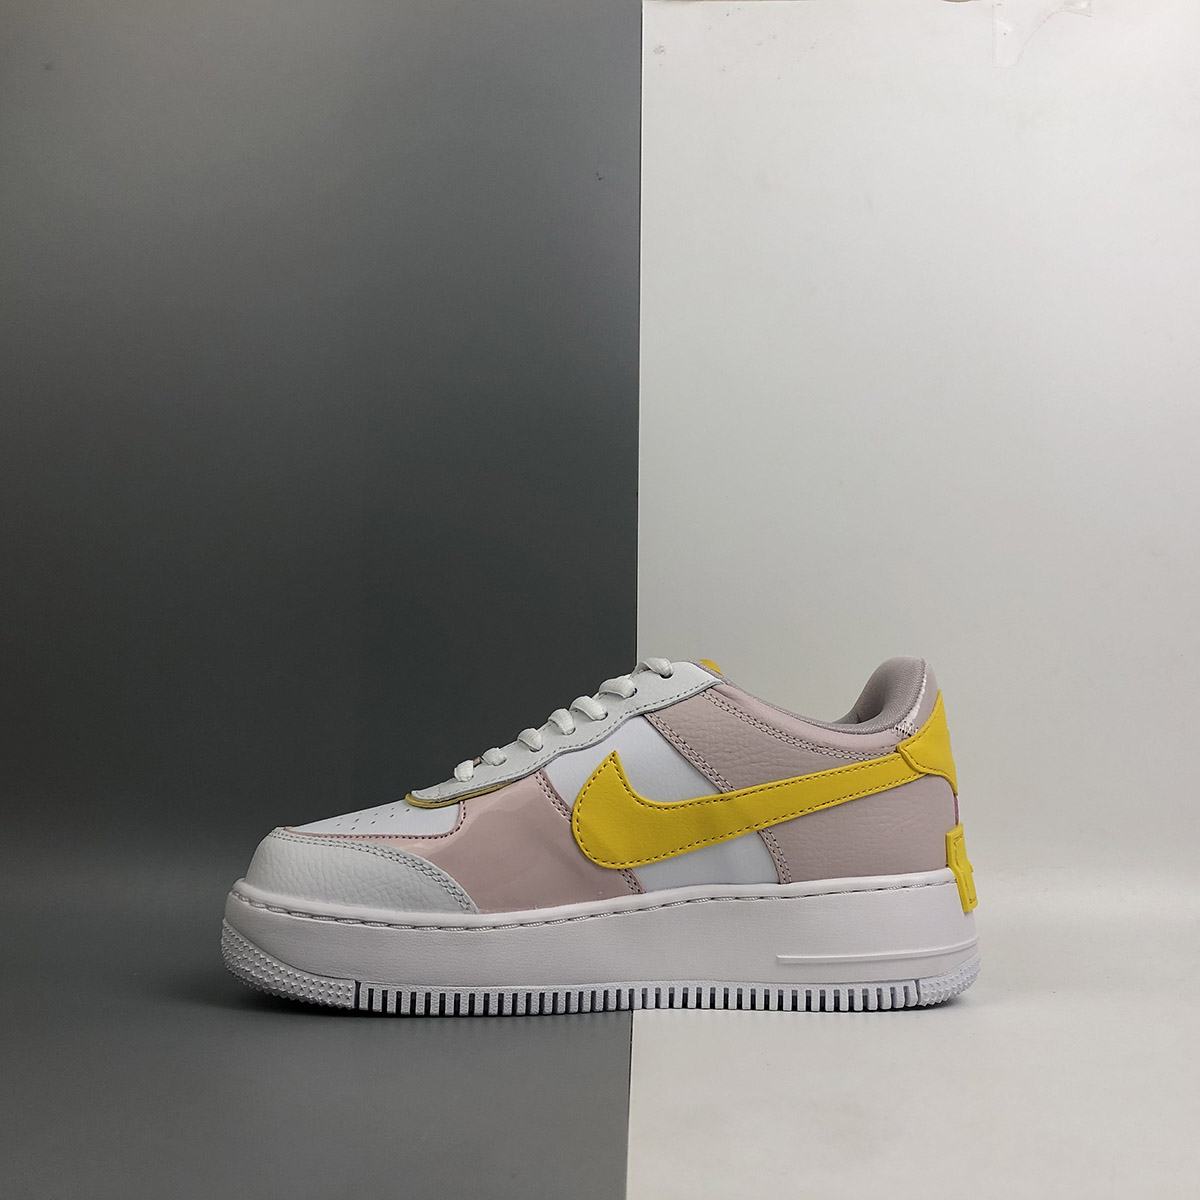 nike air force 1 white and yellow